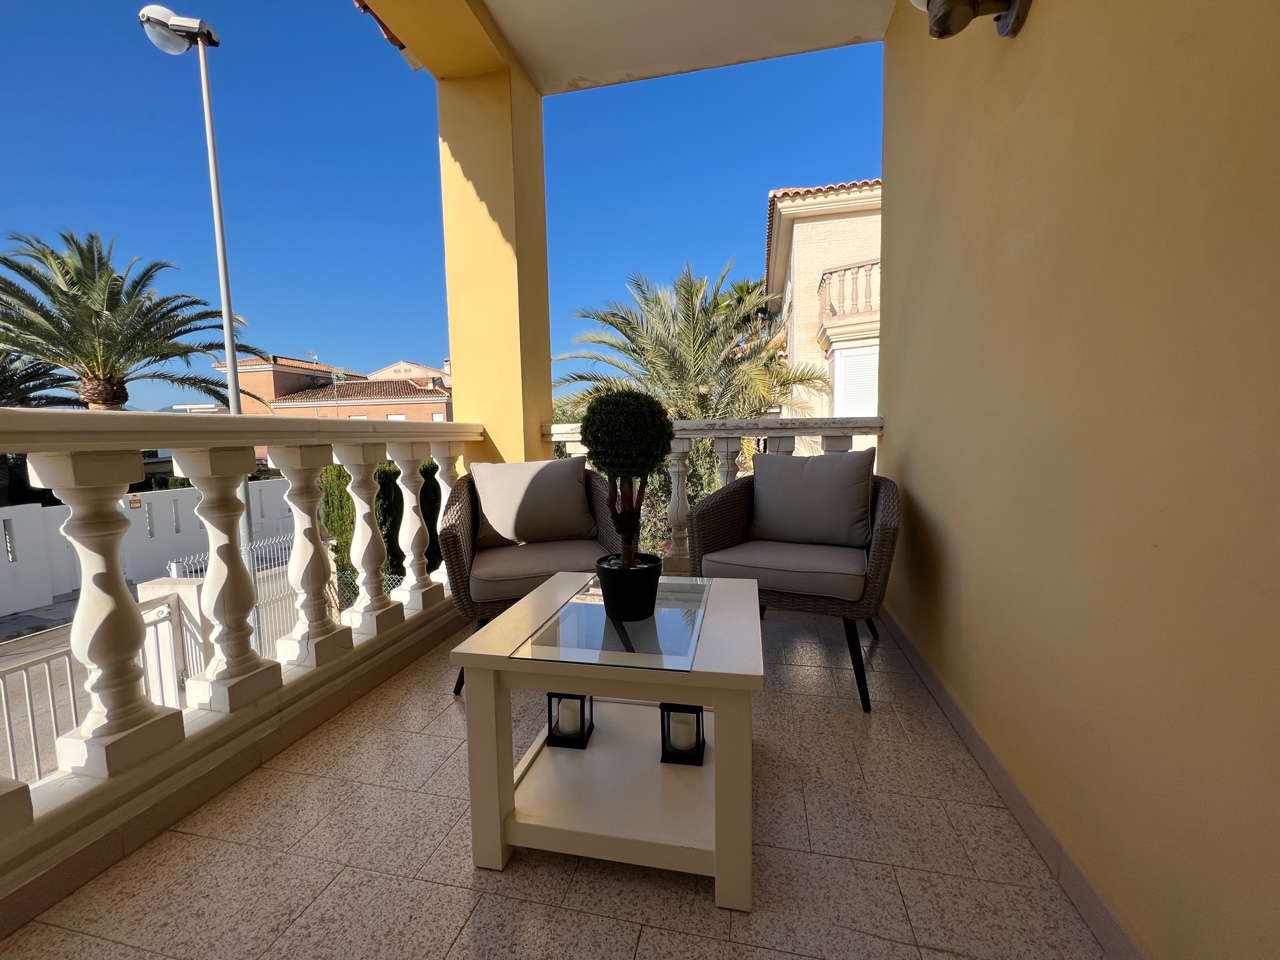 DETACHED VILLA A FEW METERS FROM THE BEACH. OLIVE